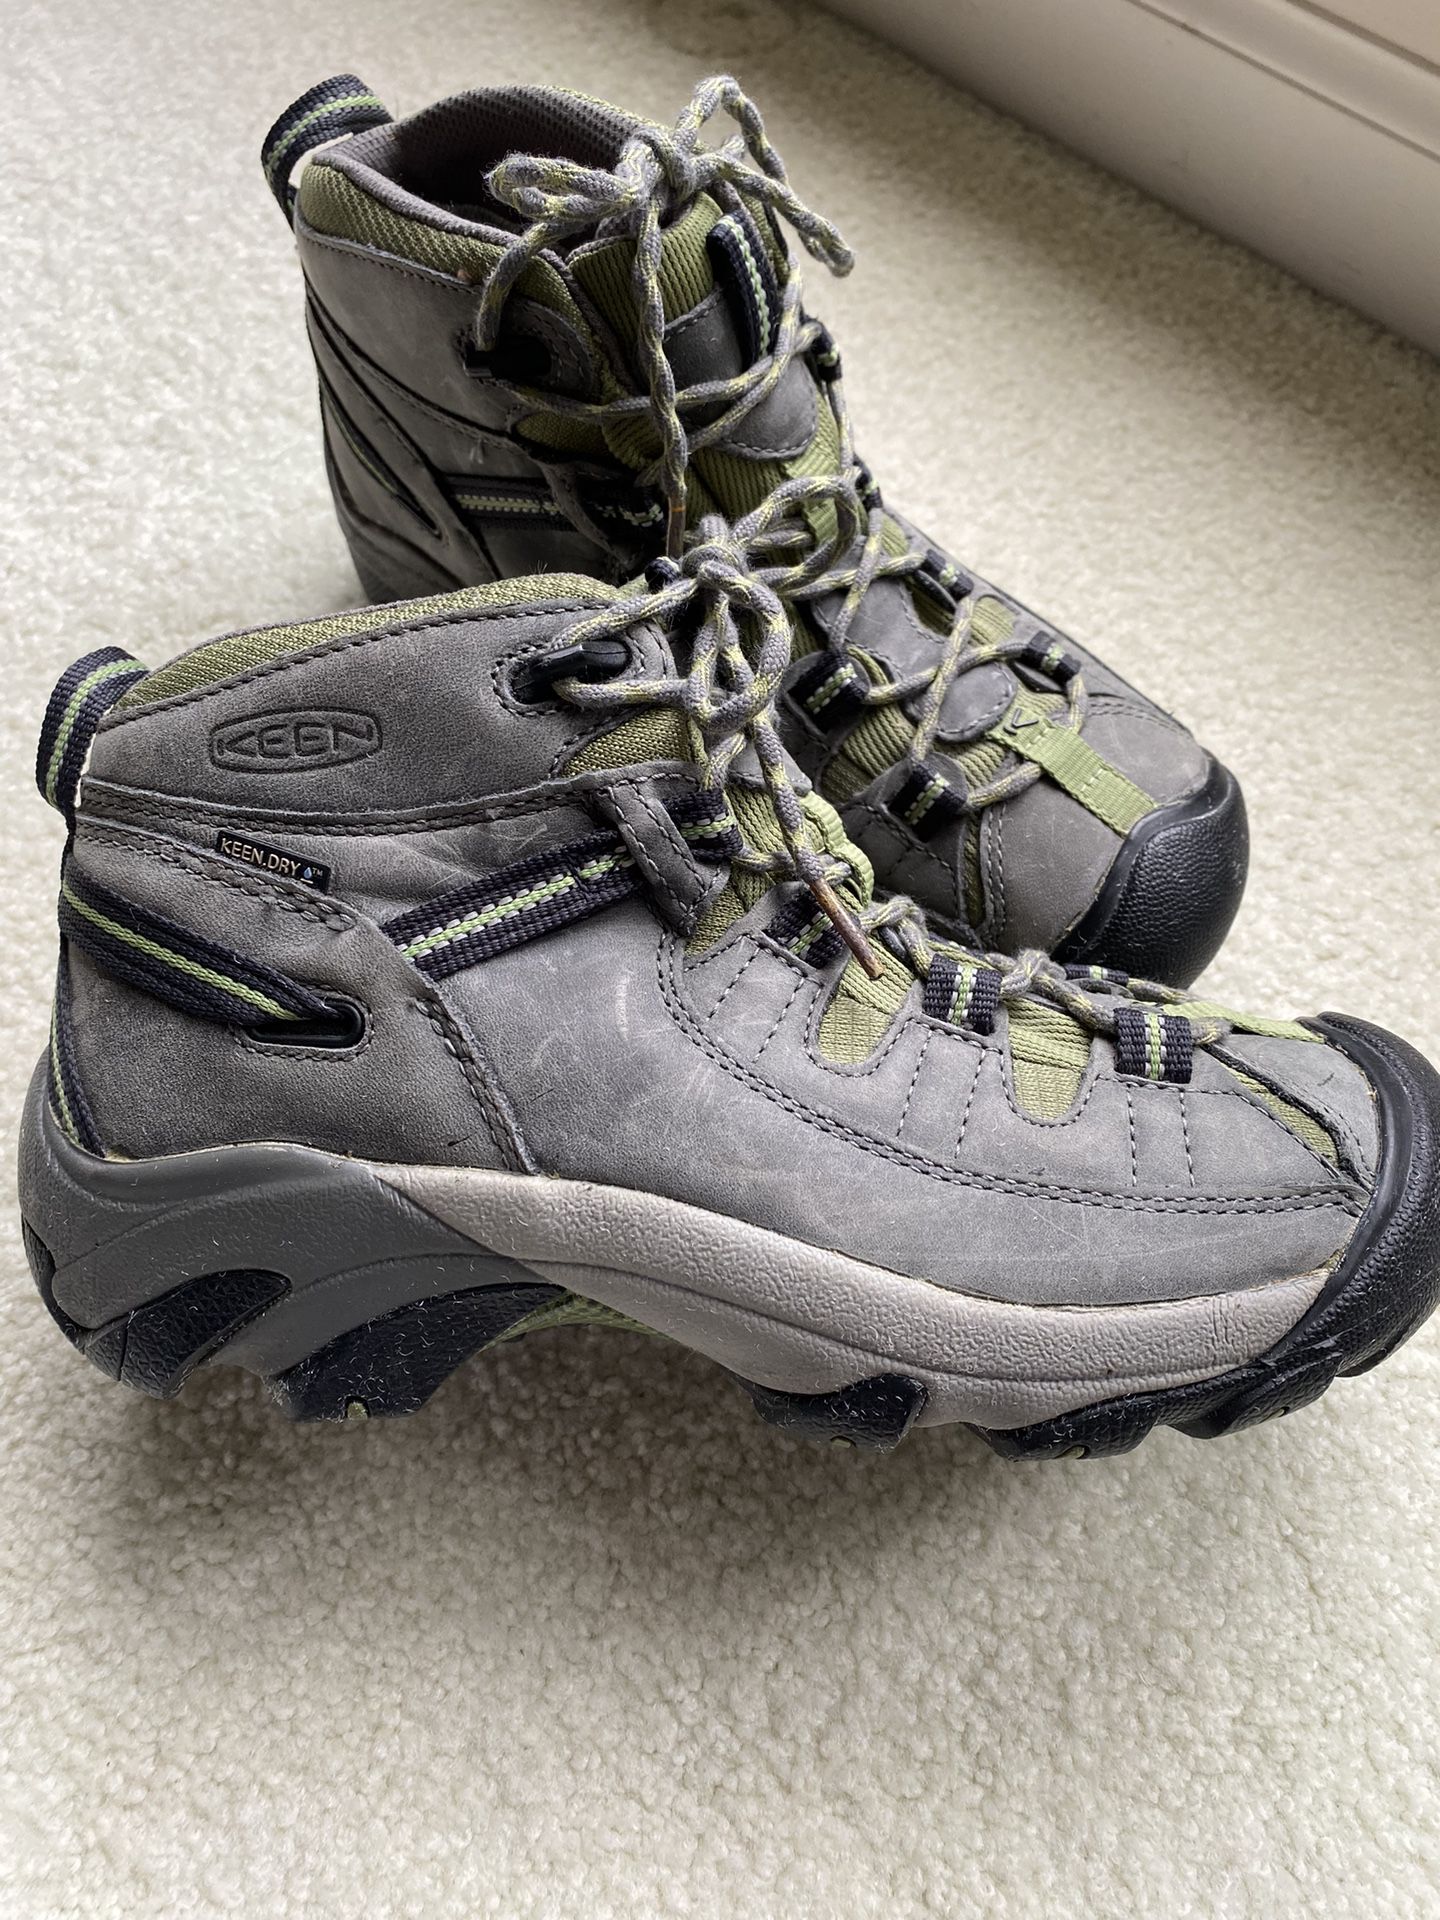 KEEN Waterproof Breathable Leather Hiking Boots Womens 7.5